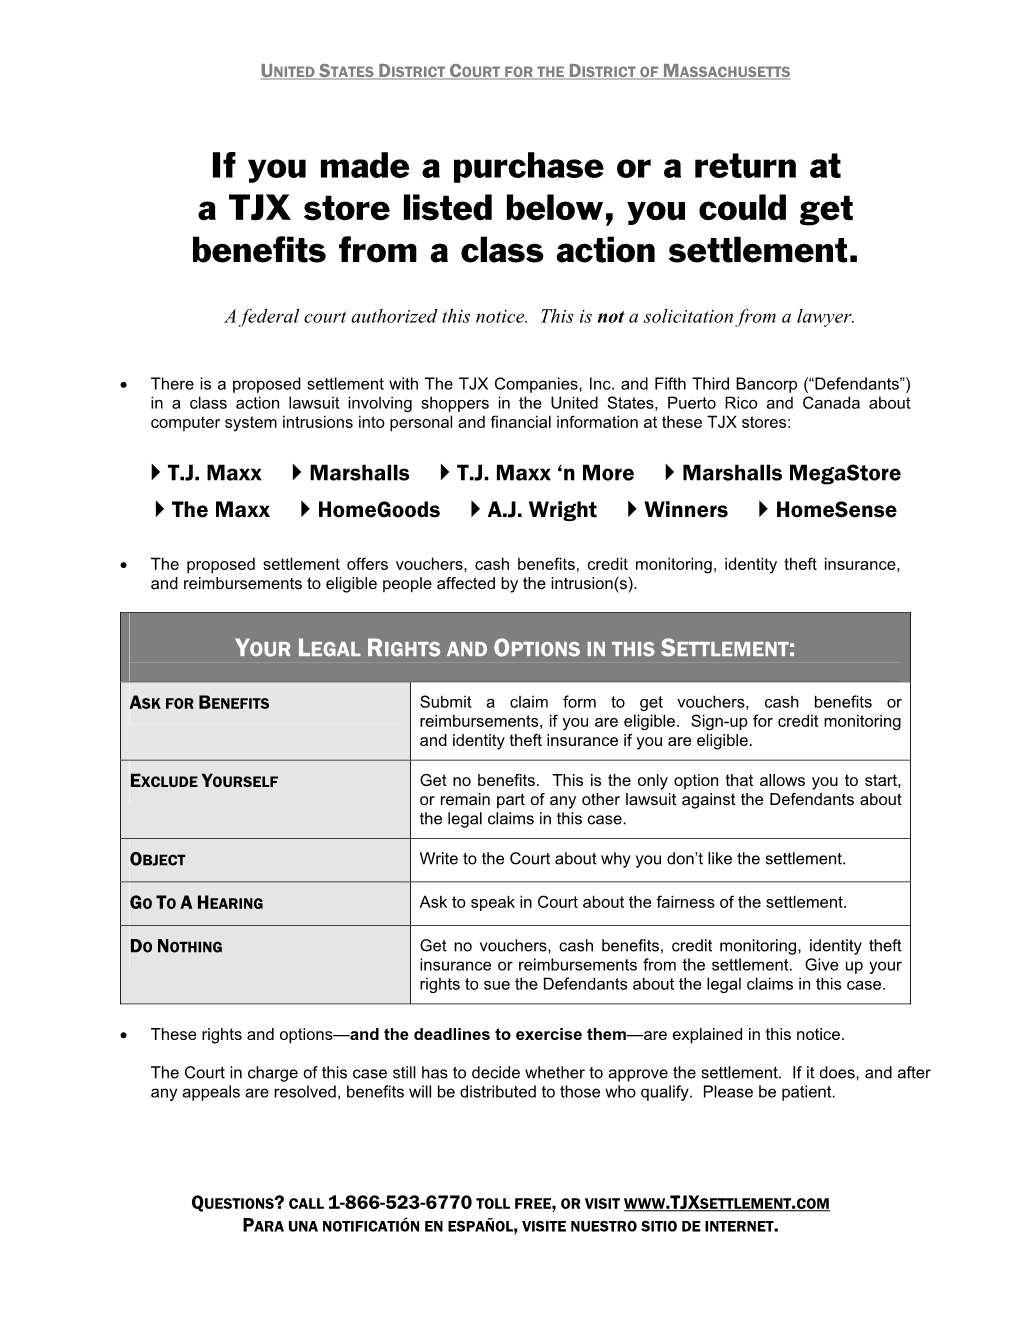 If You Made a Purchase Or a Return at a TJX Store Listed Below, You Could Get Benefits from a Class Action Settlement